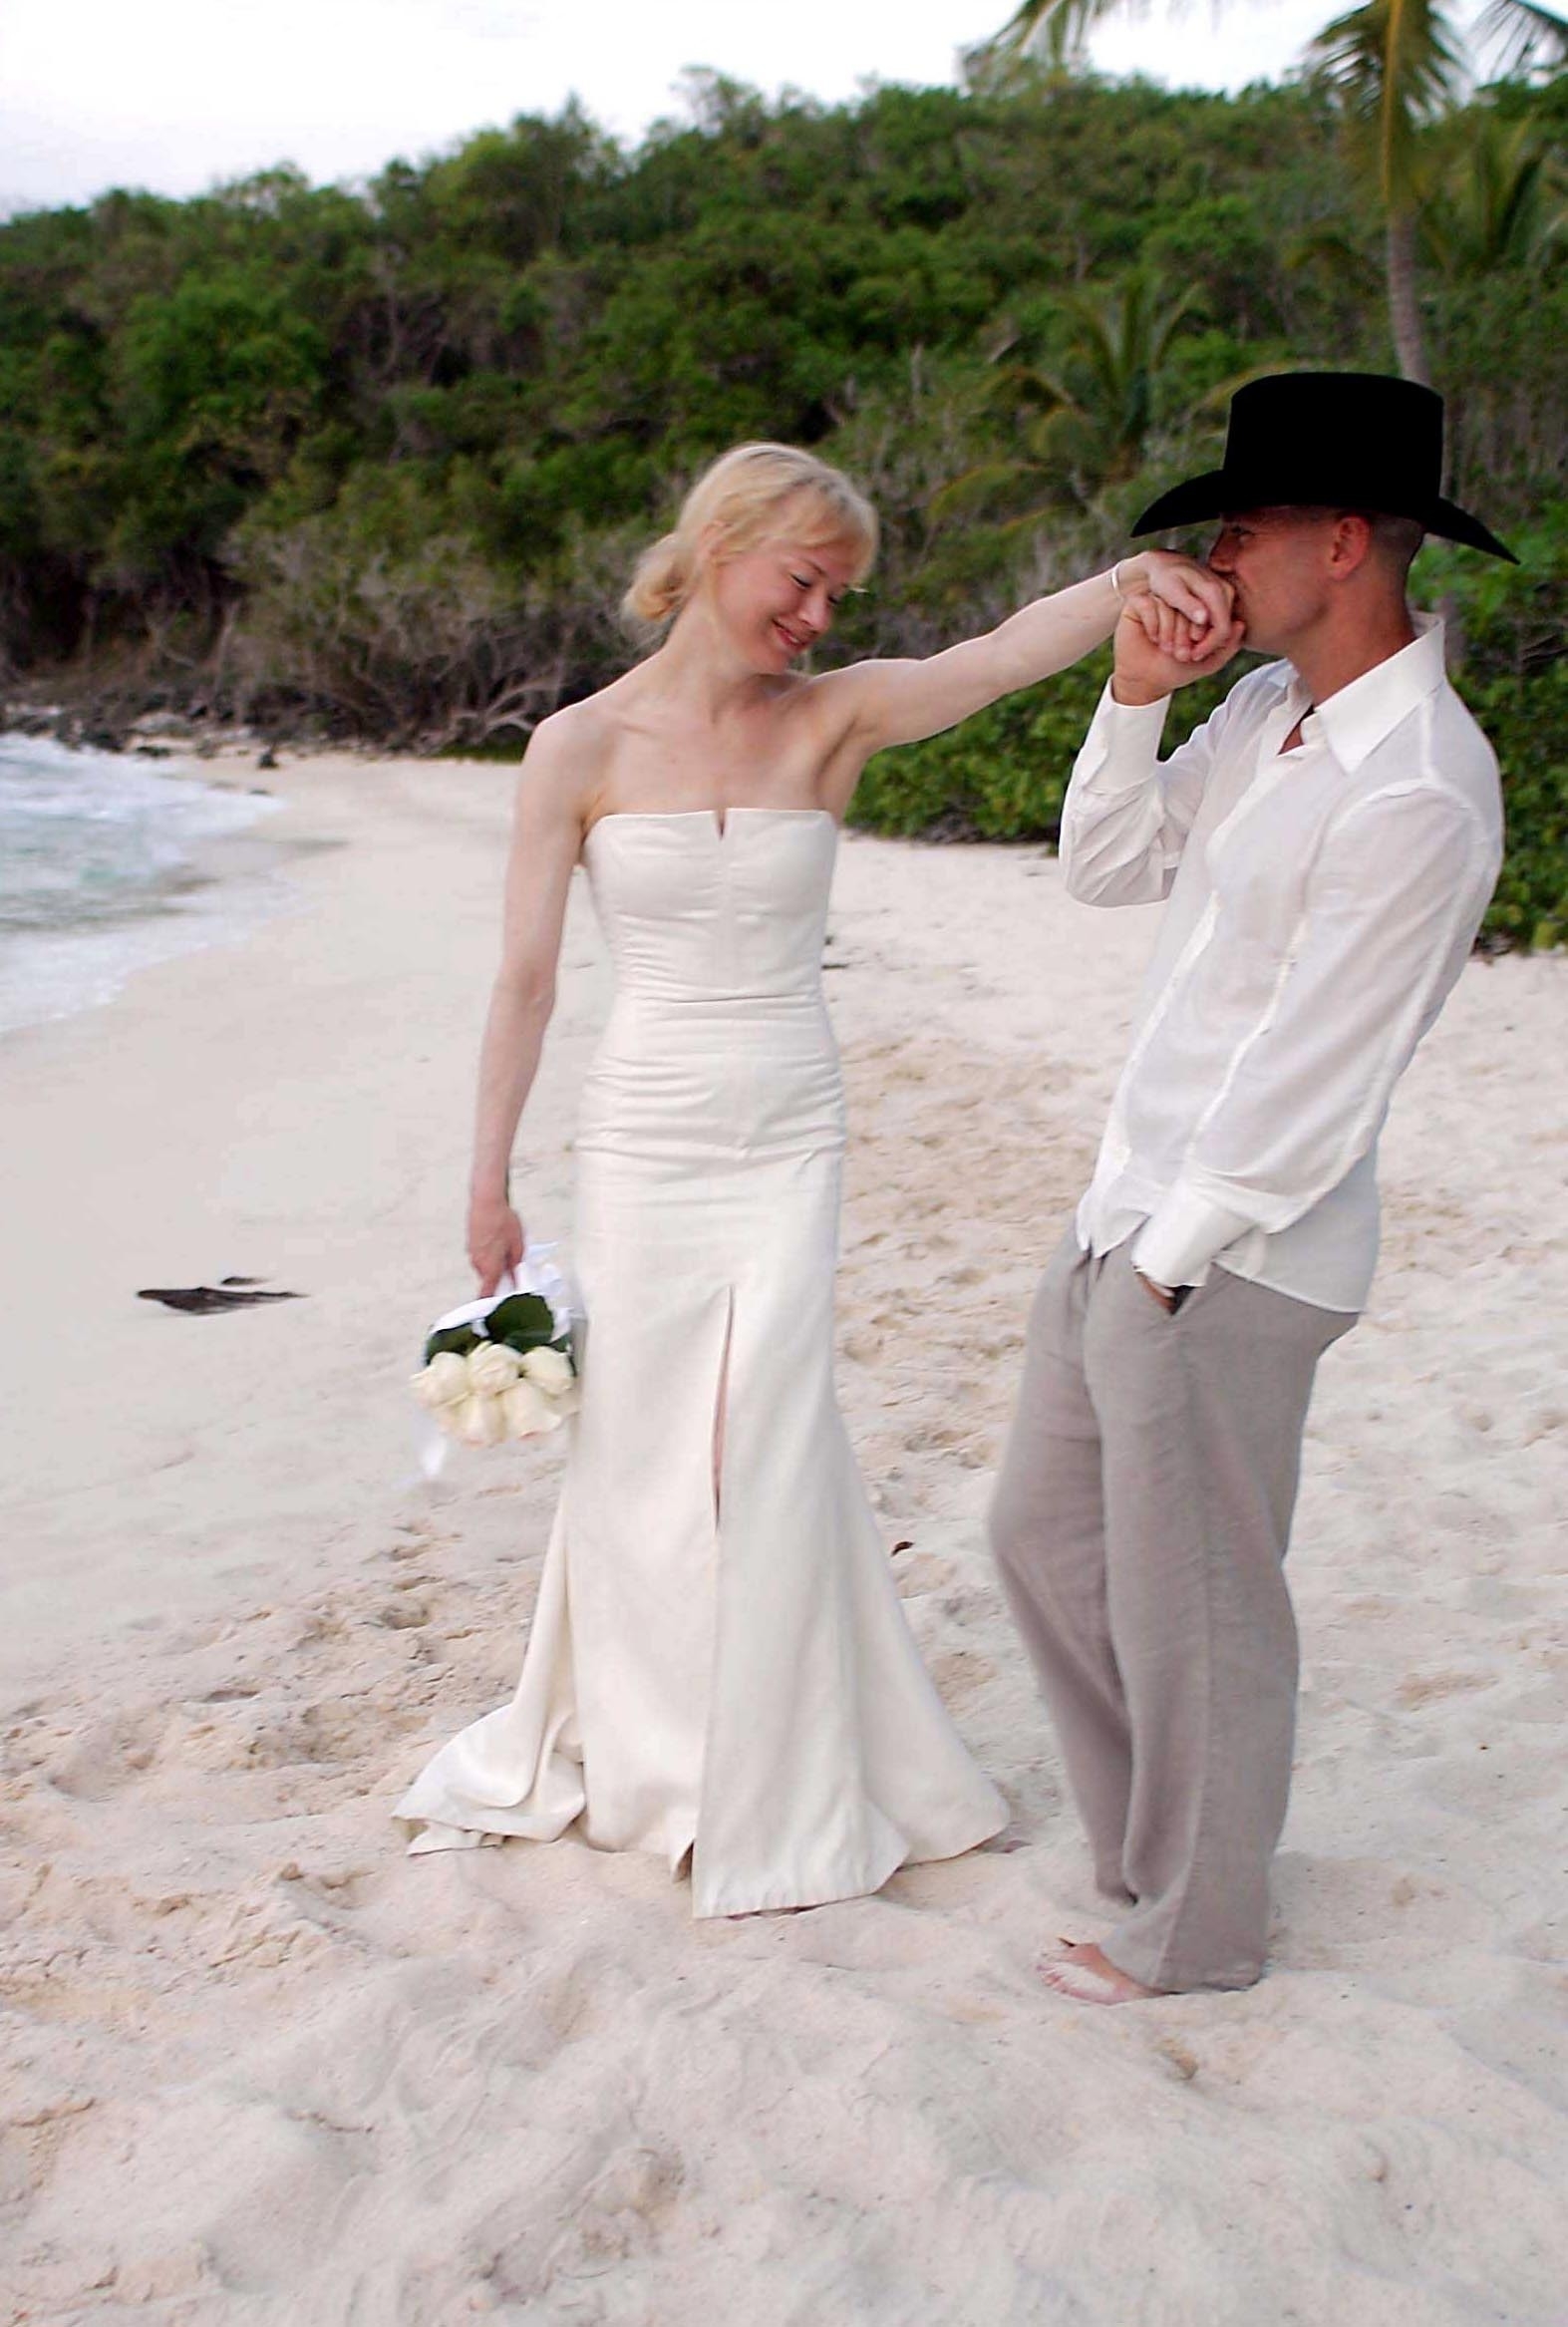 Renée Zellweger and Kenny Chesney on their wedding day